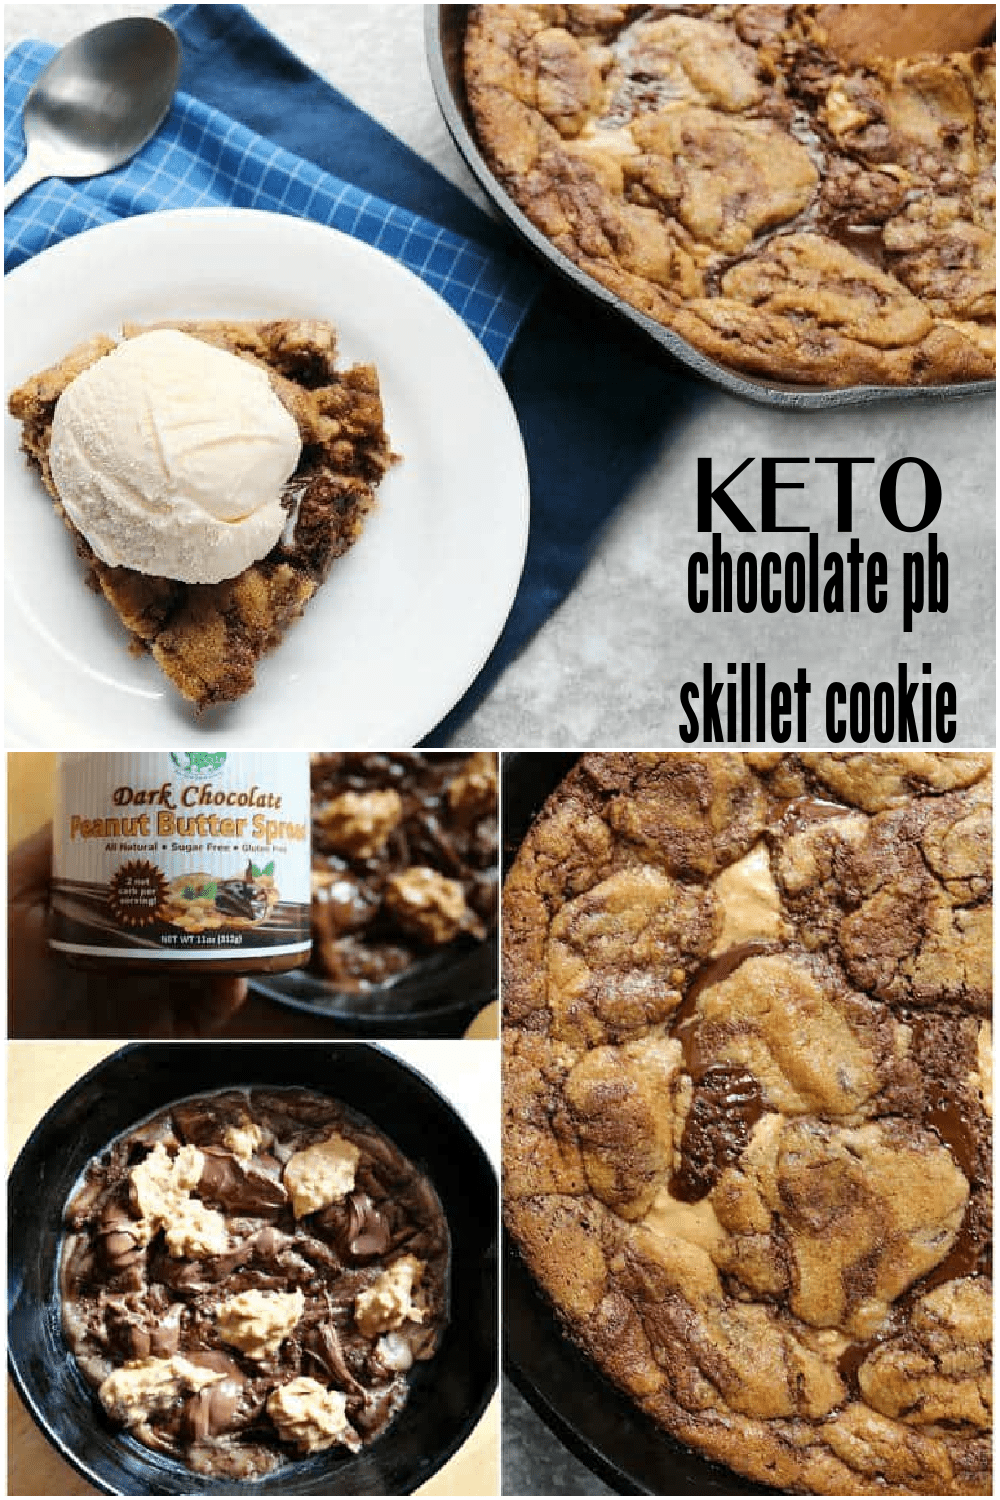 keto chocolate peanut butter cookie made in a skillet.